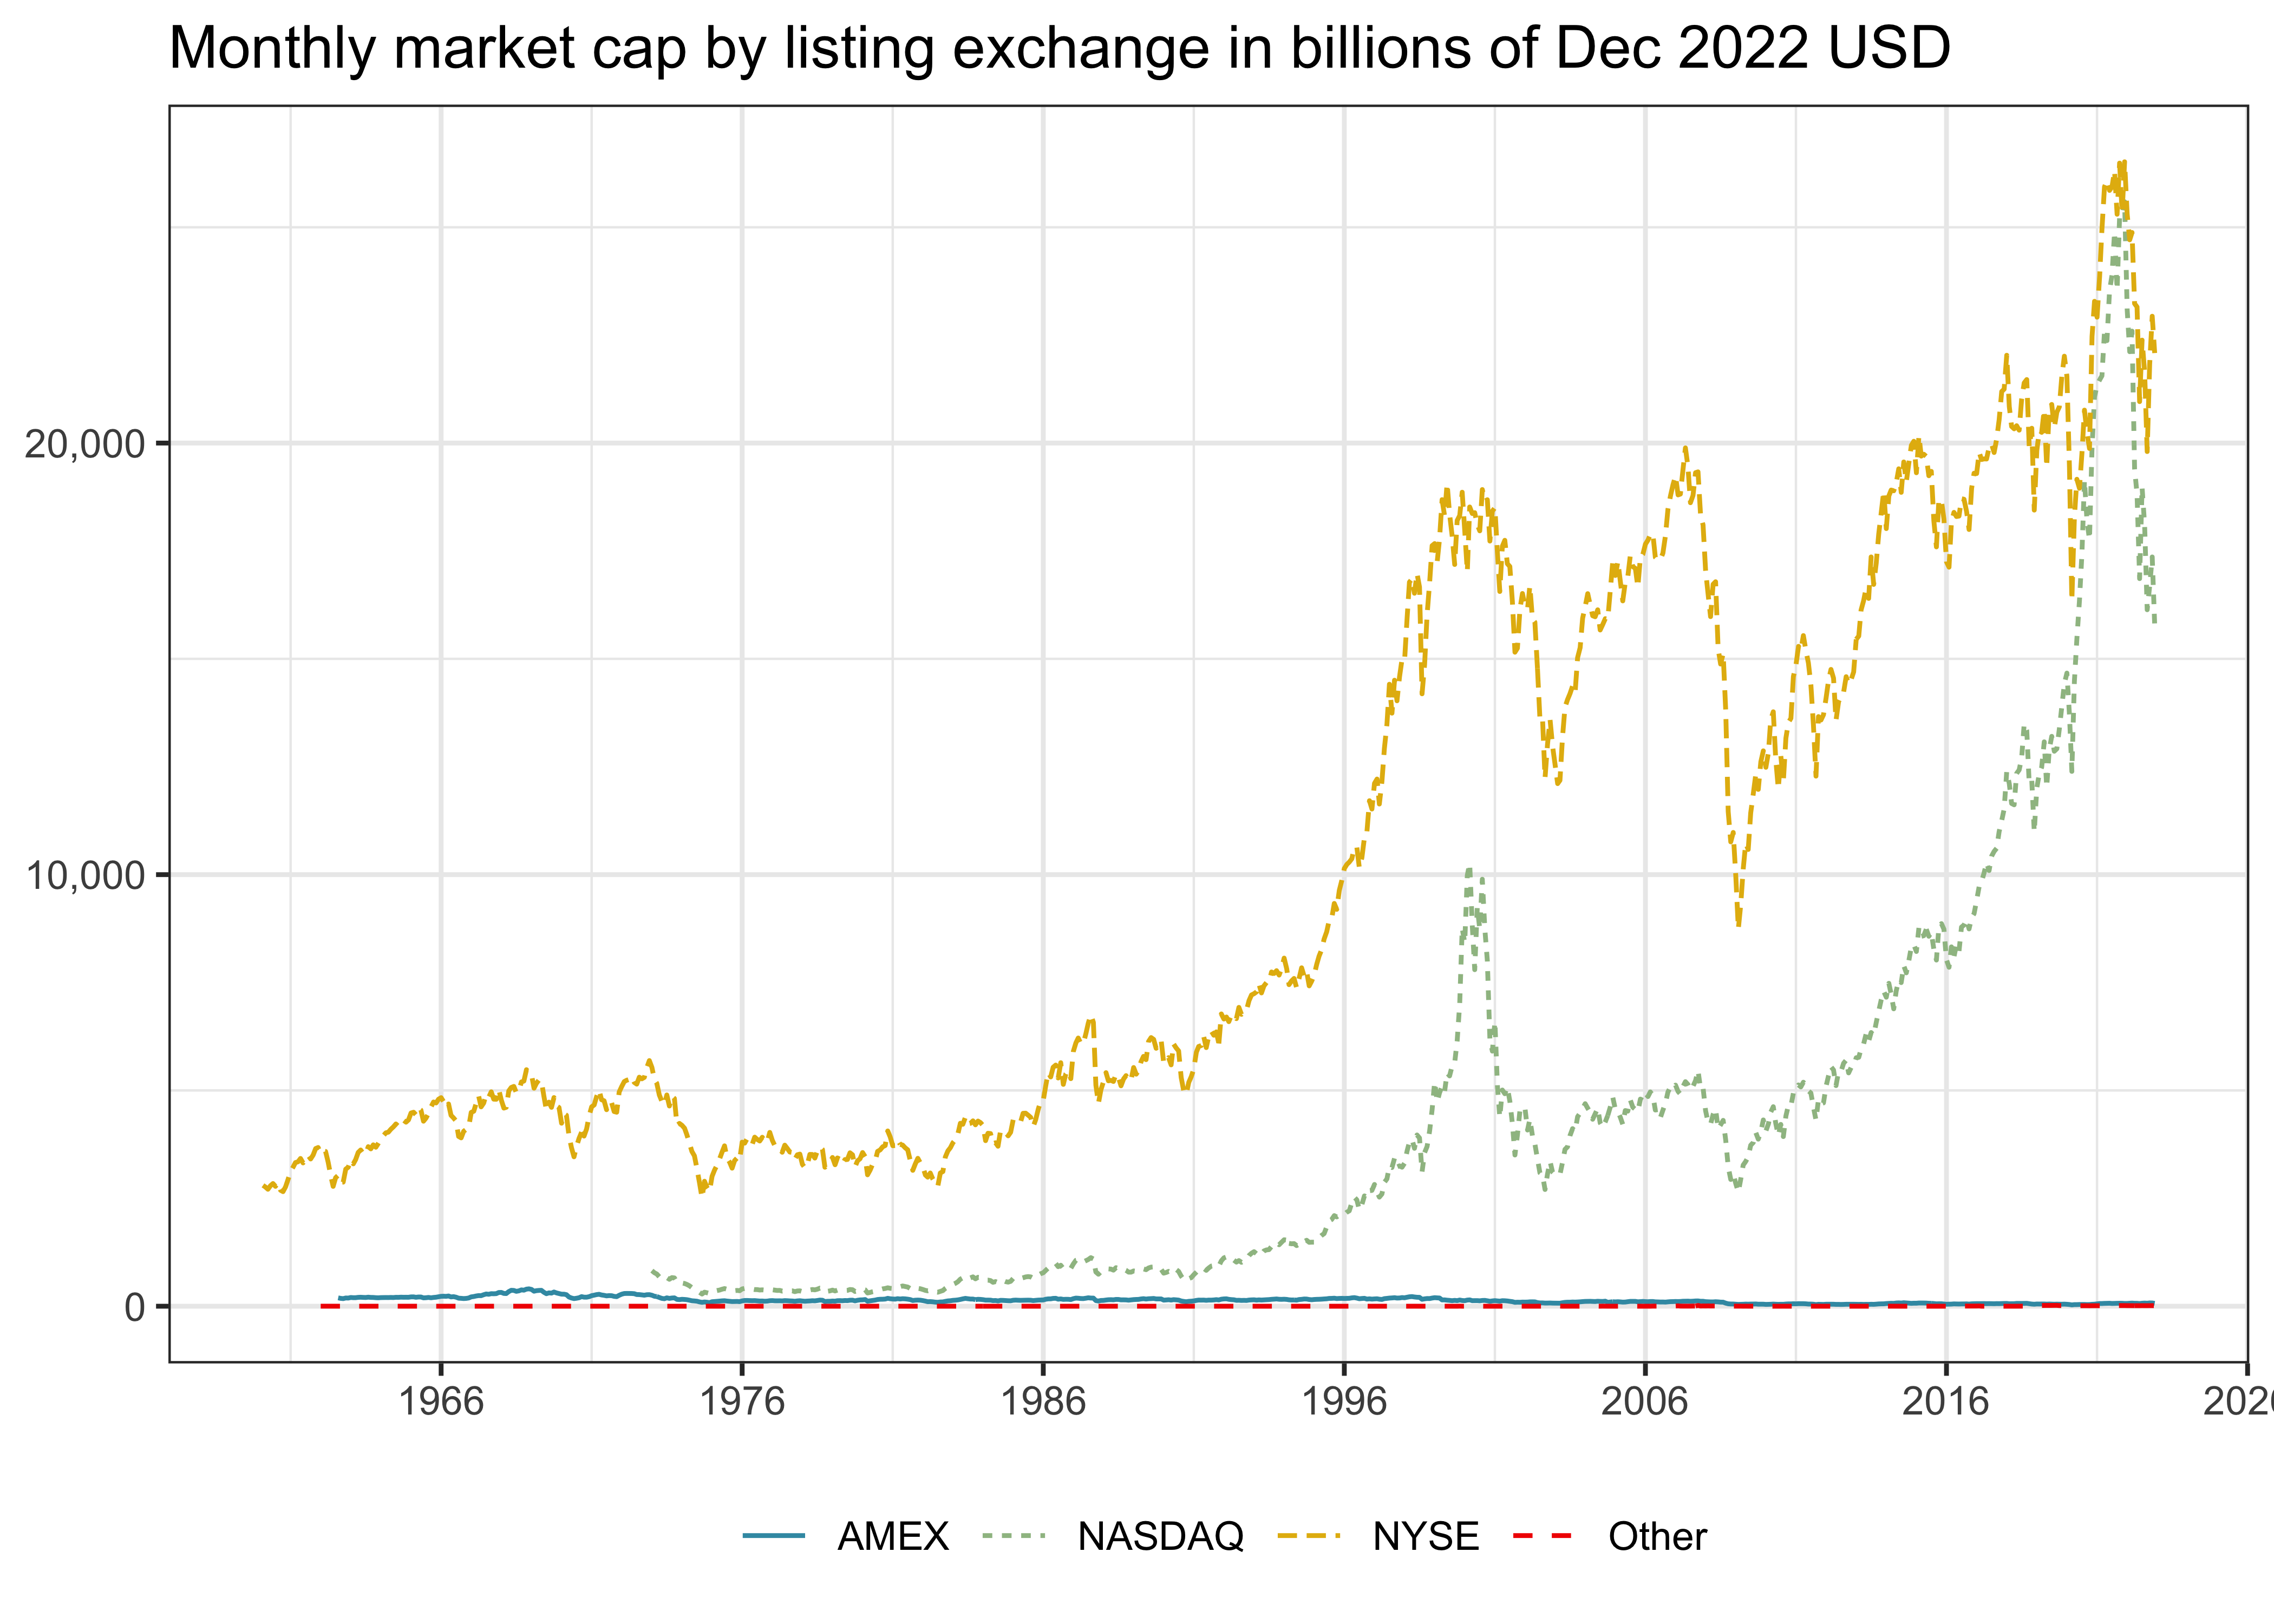 Title: Monthly market cap by listing exchange in billion USD as of Dec 2022. The figure shows a line chart of the total market capitalization of all stocks aggregated by the listing exchange from 1960 to 2022, with years on the horizontal axis and the corresponding market capitalization on the vertical axis. Historically, NYSE listed stocks had the highest market capitalization. In the more recent past, the valuation of NASDAQ listed stocks exceeded that of NYSE listed stocks.